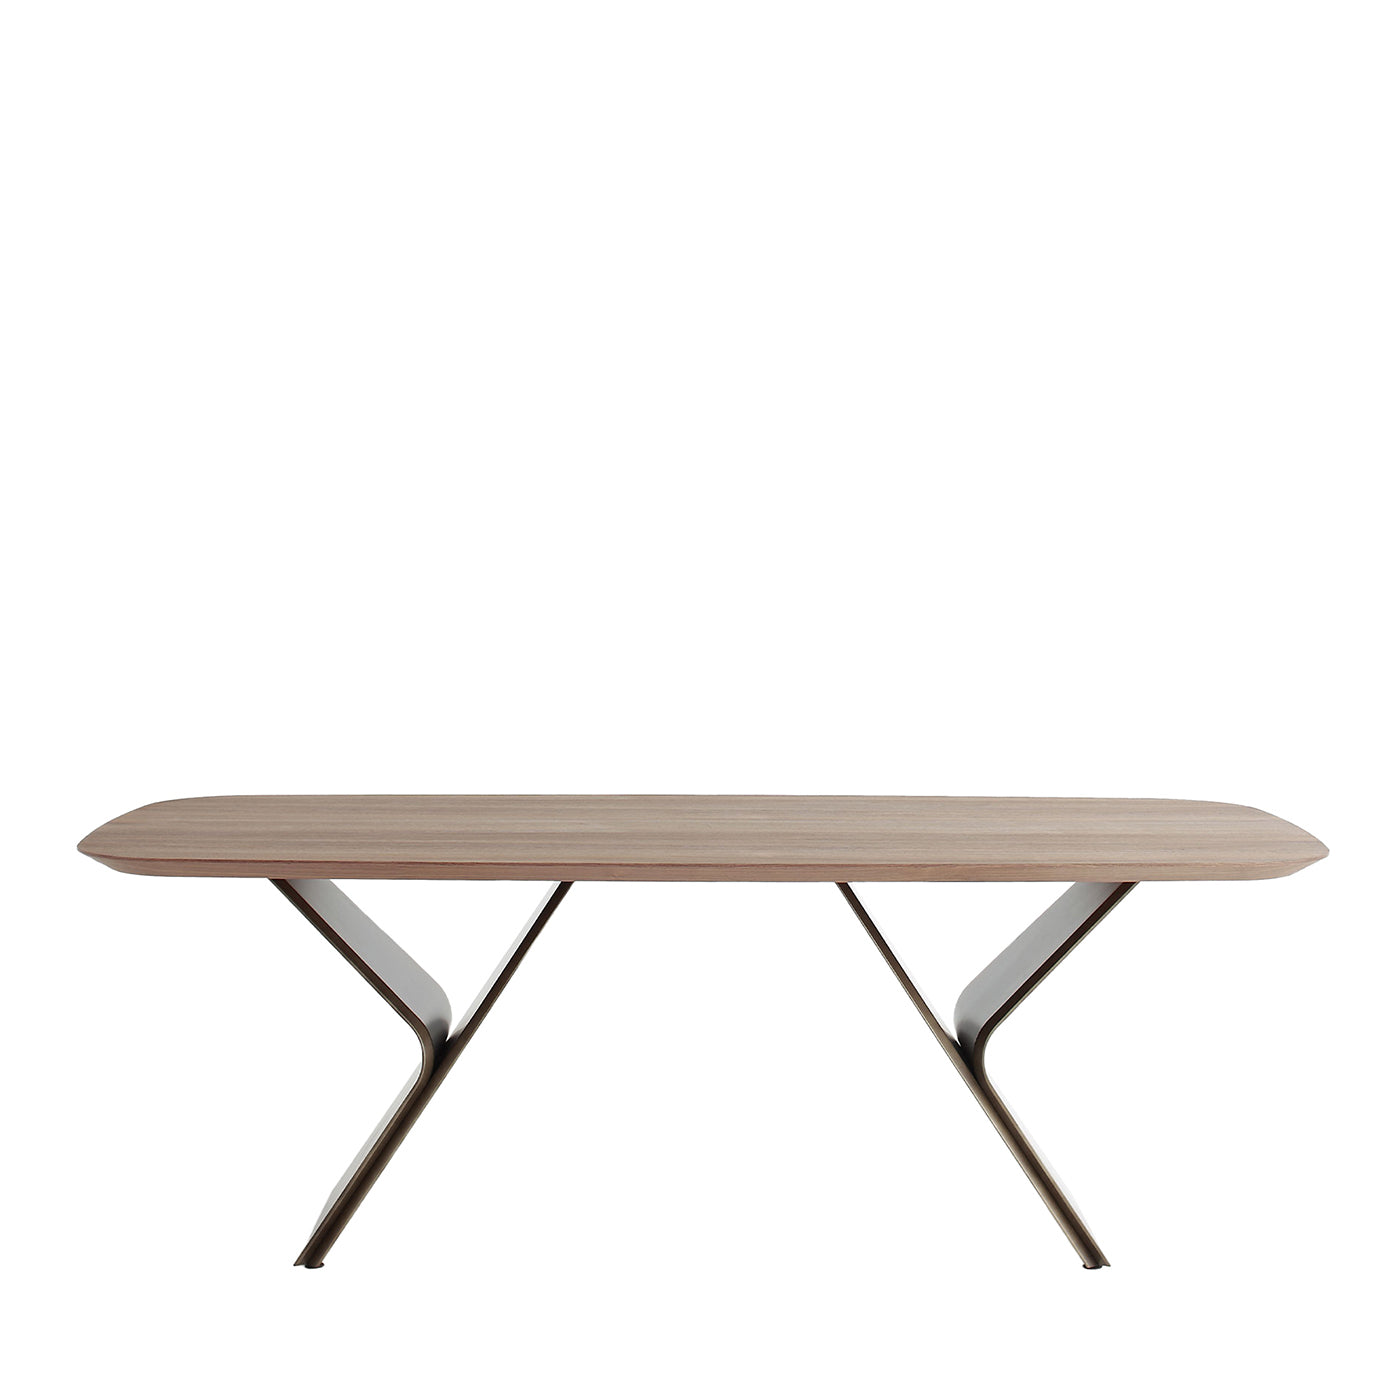 Metaverso Canaletto Walnut Wood Table - Main view